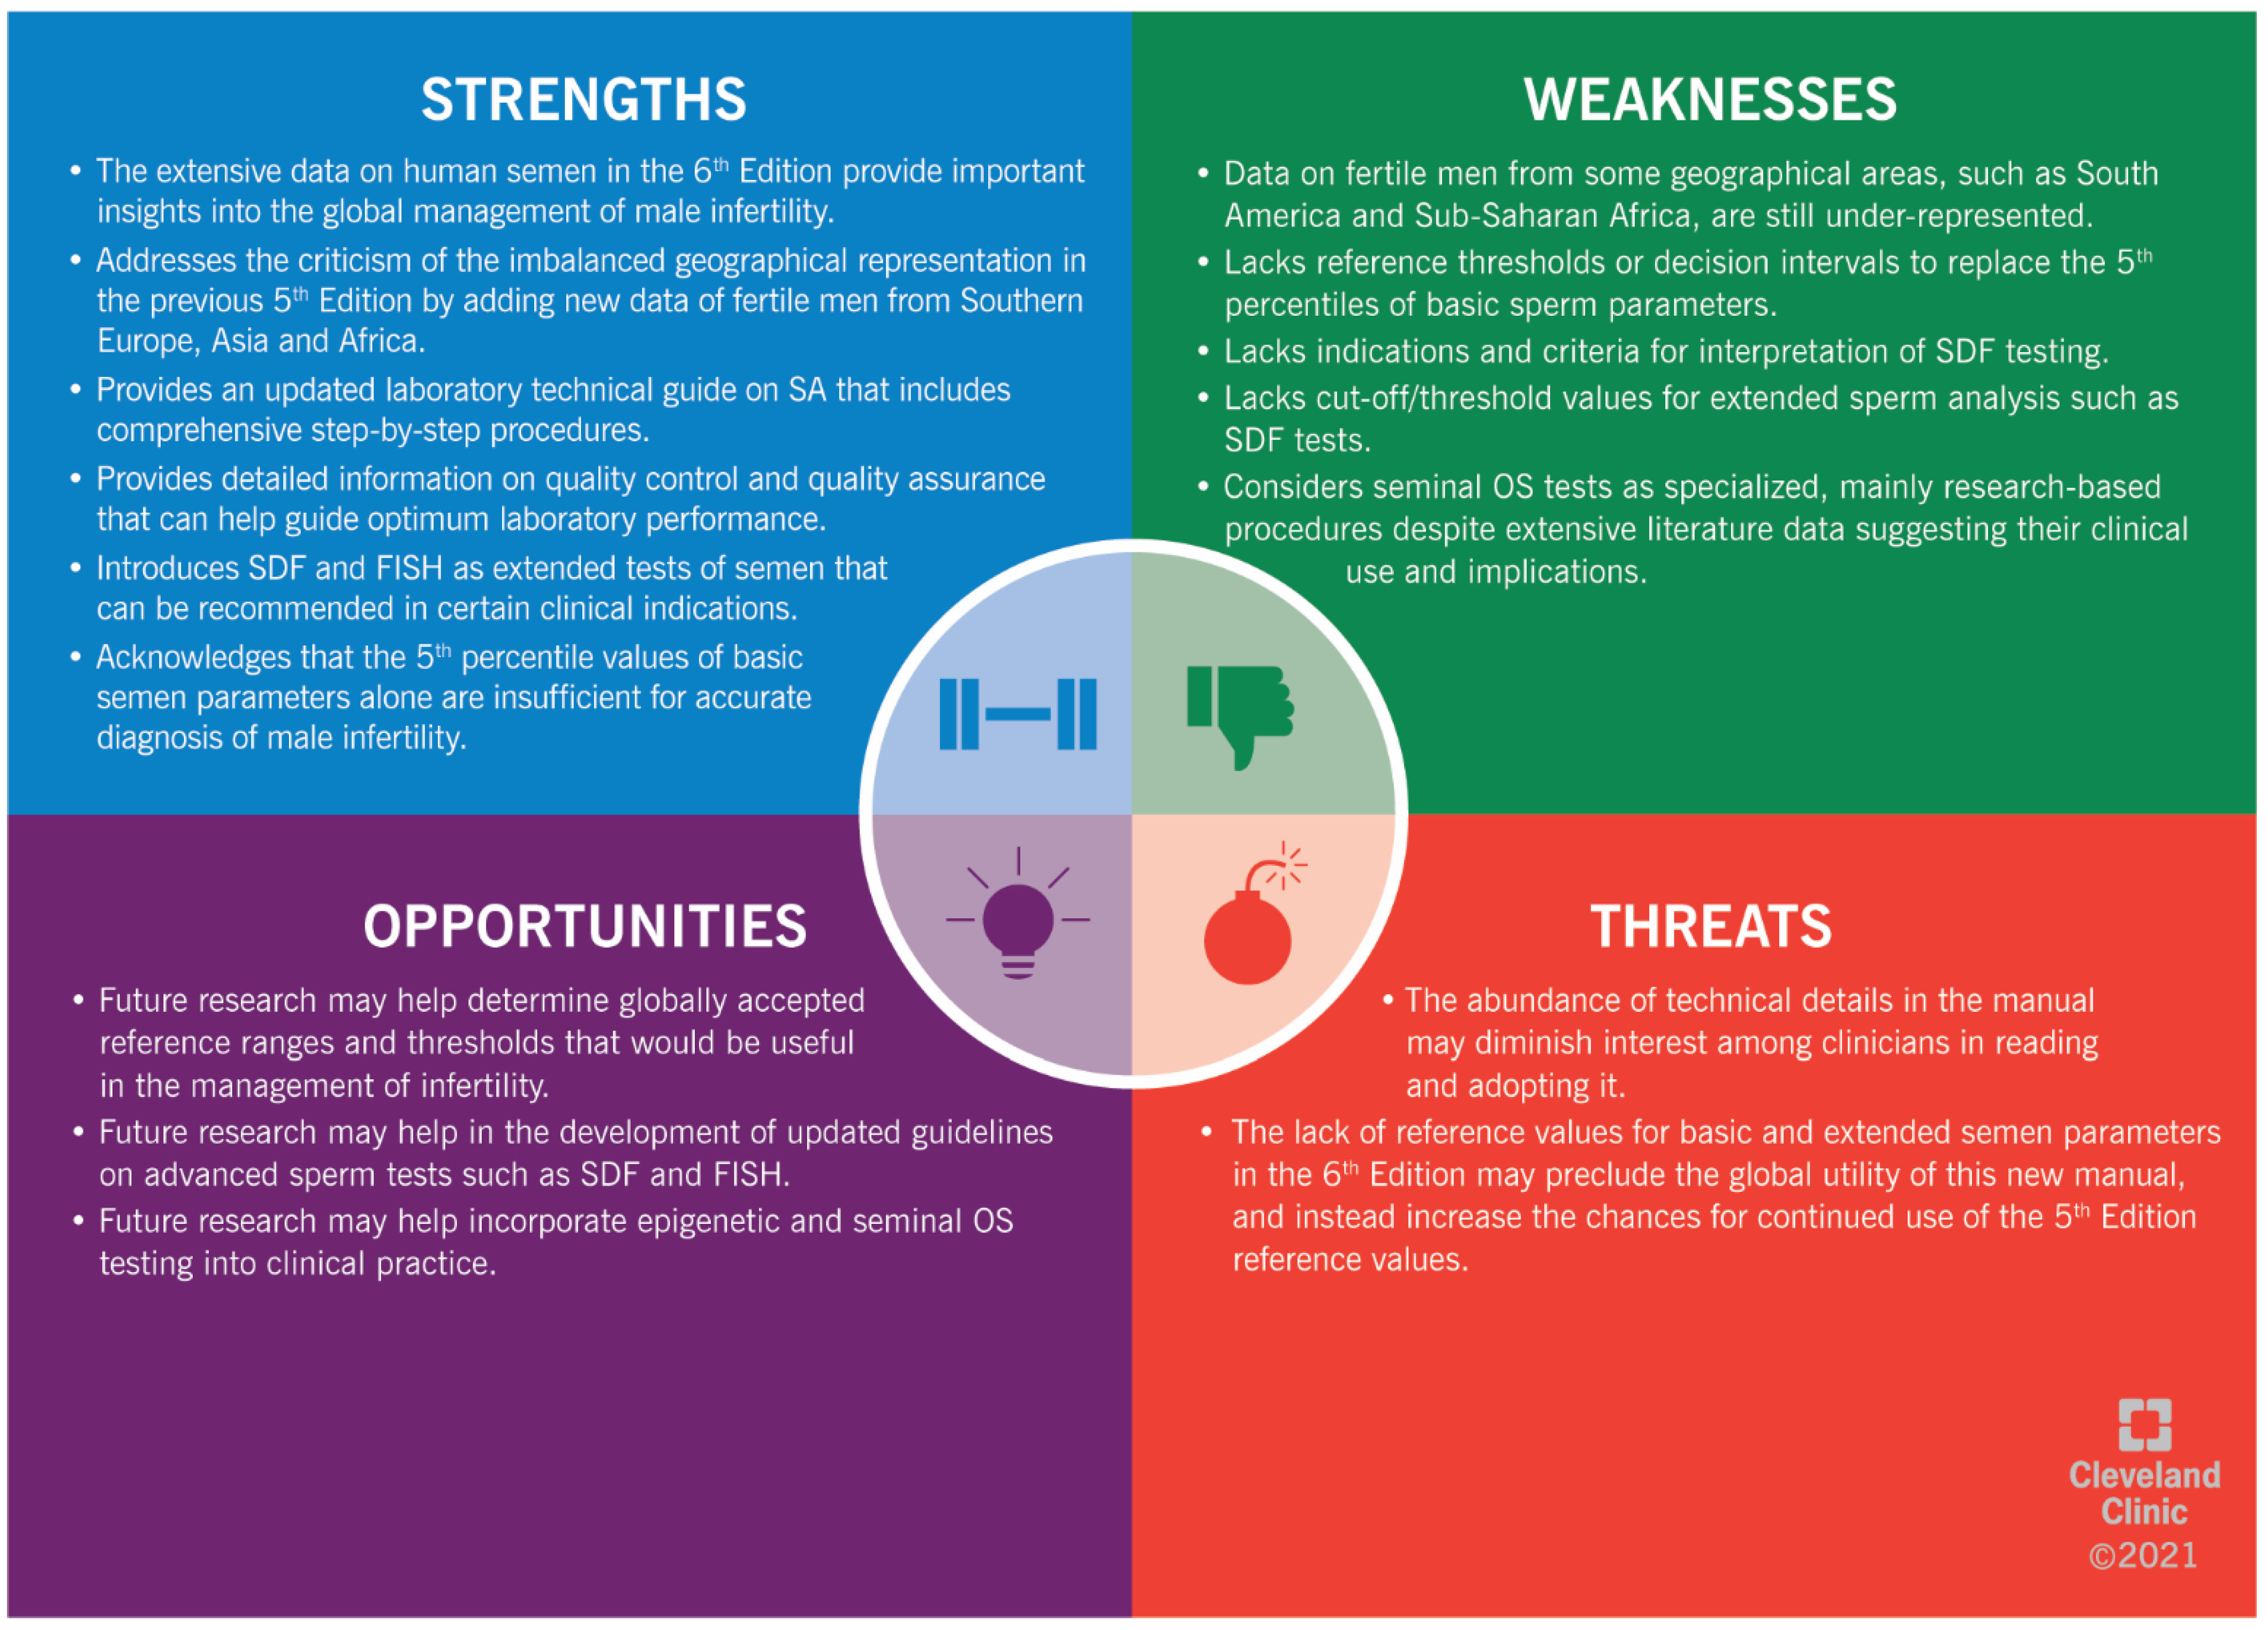 Predictive approach SWOT analysis.